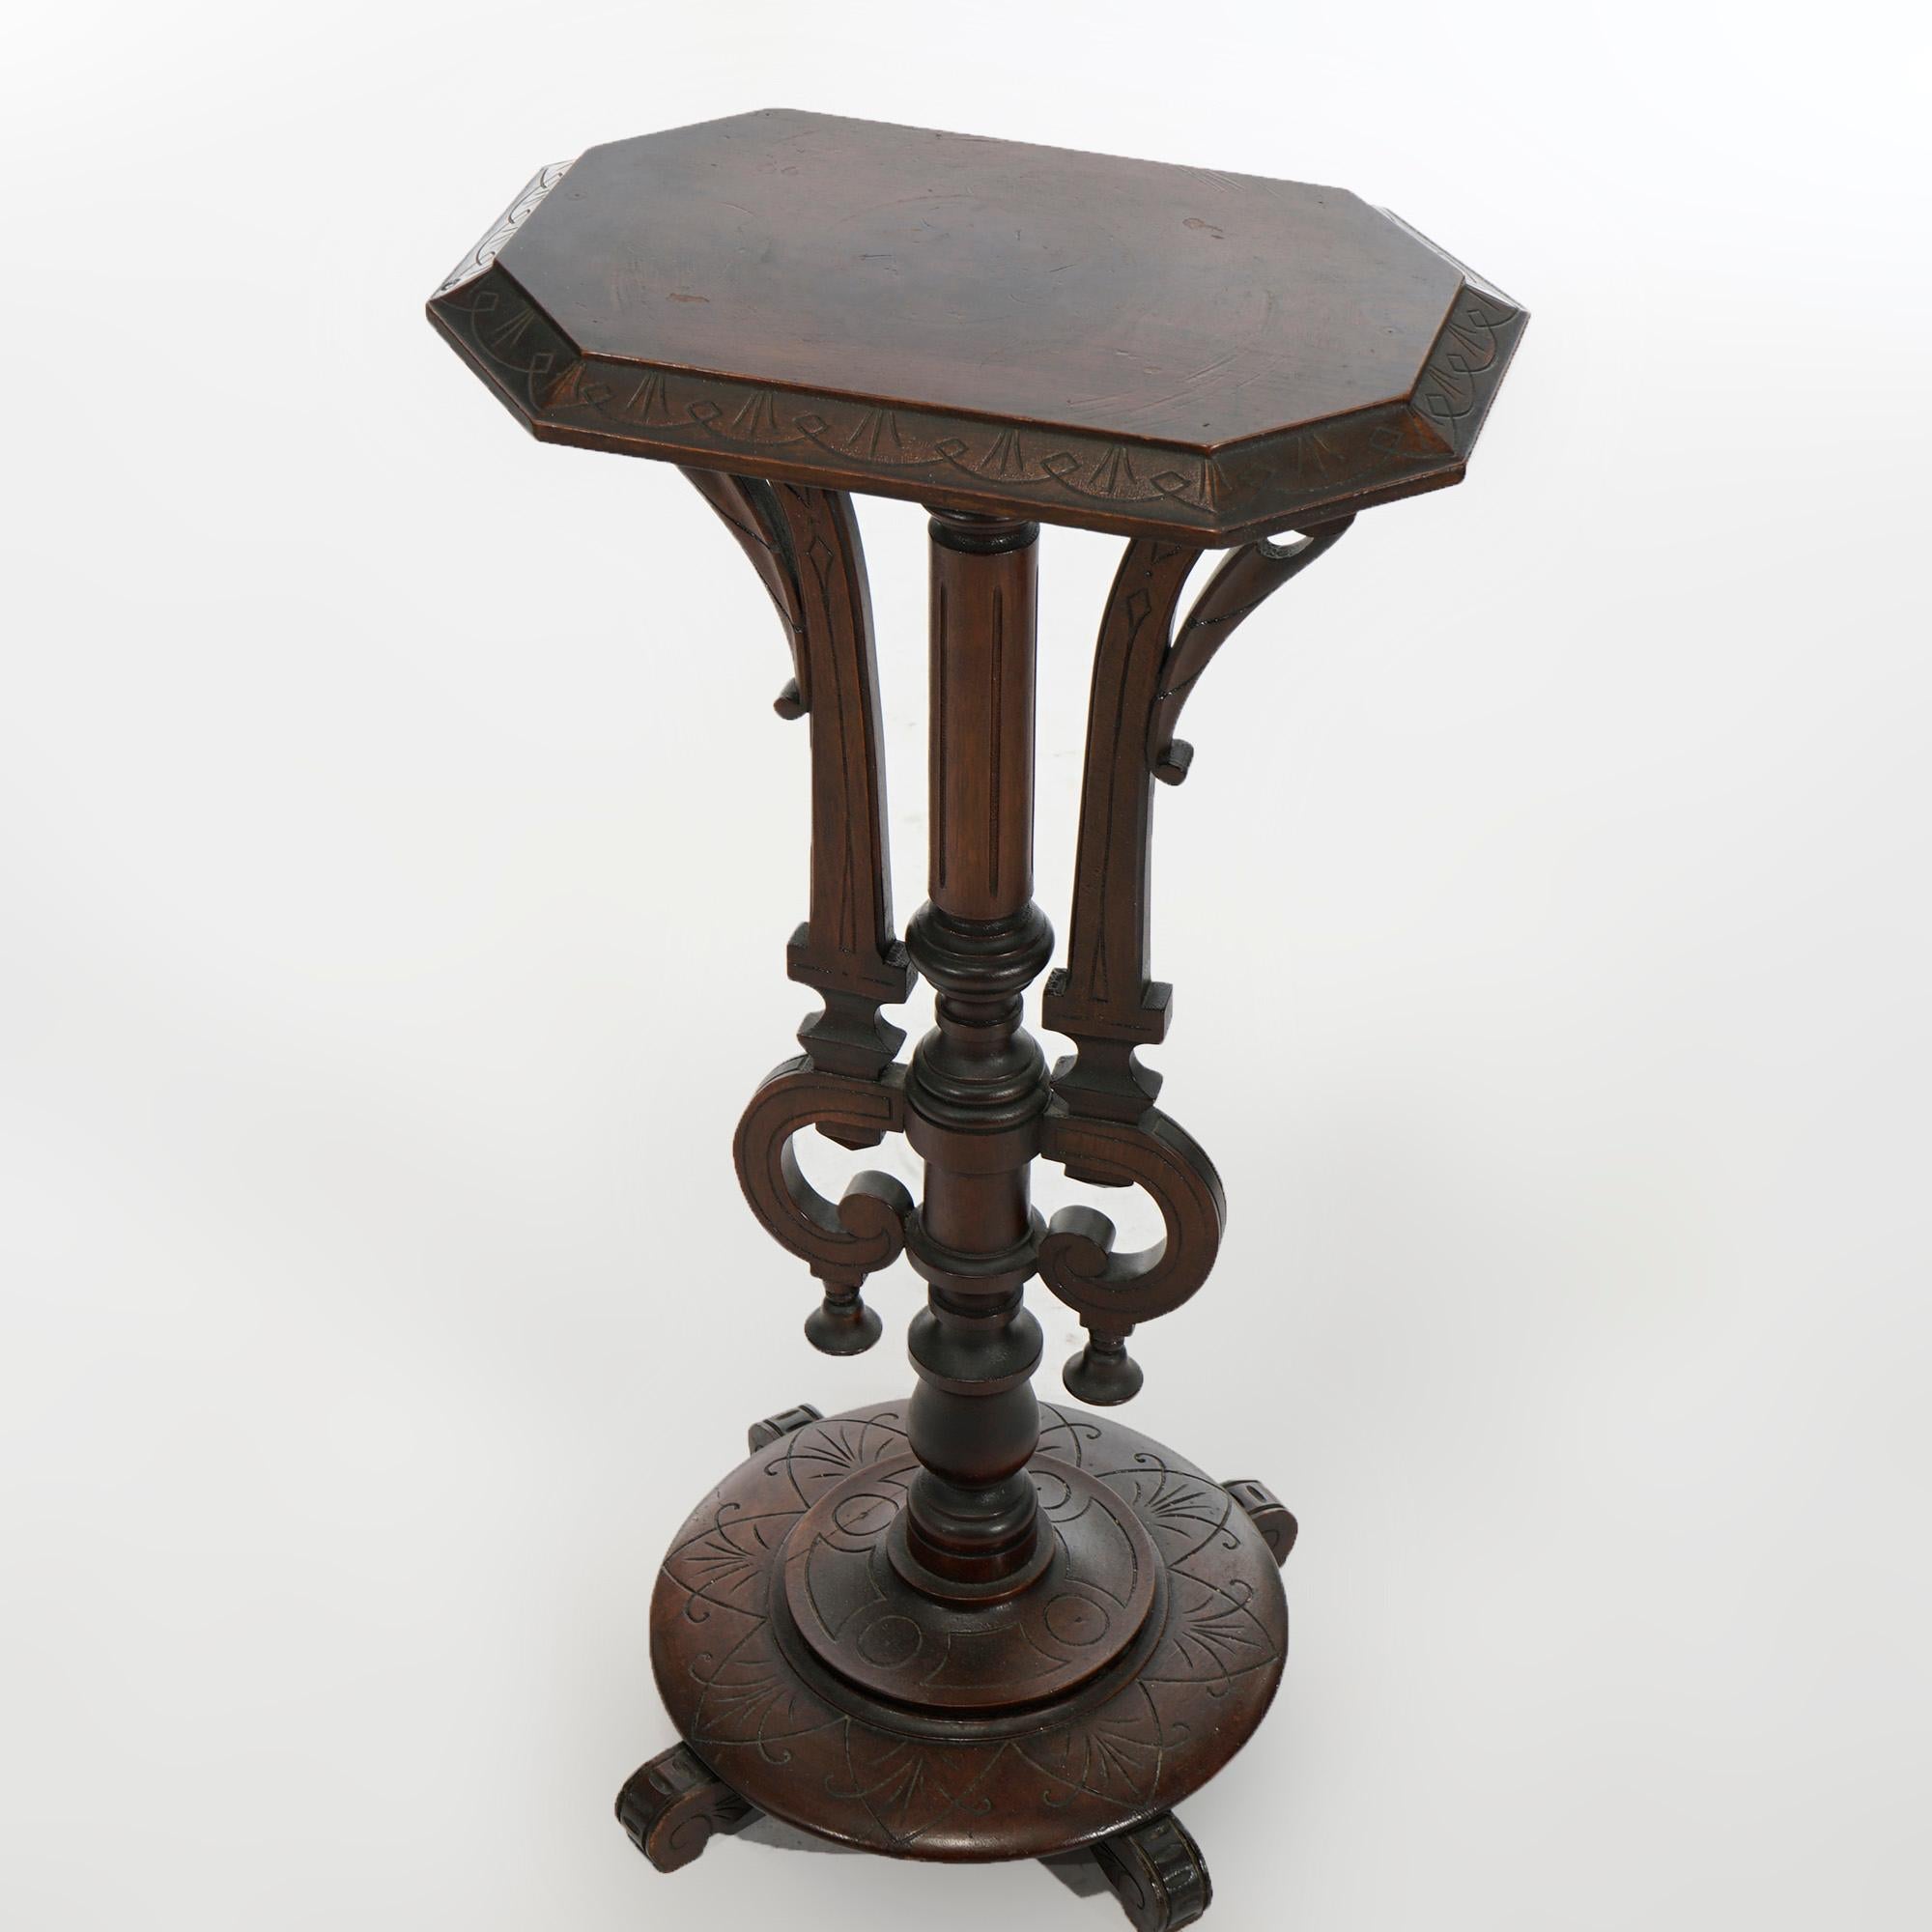 Antique Aesthetic Movement Carved Walnut Sculpture Display Pedestal Circa 1890 For Sale 2